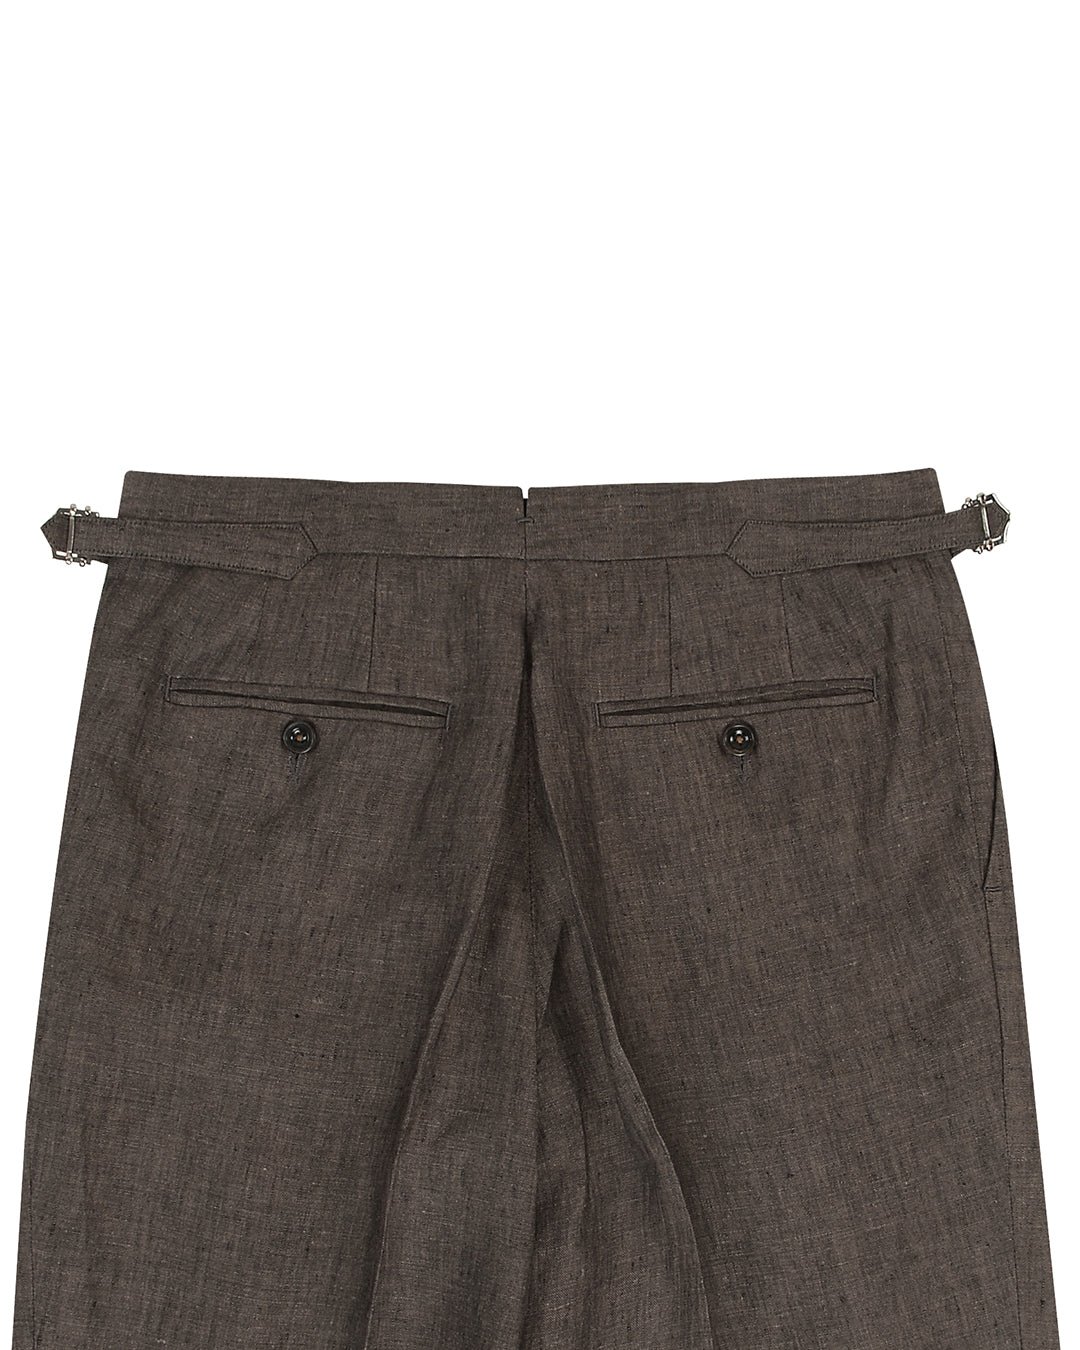 Back view of custom linen pants for men by Luxire in drab brown